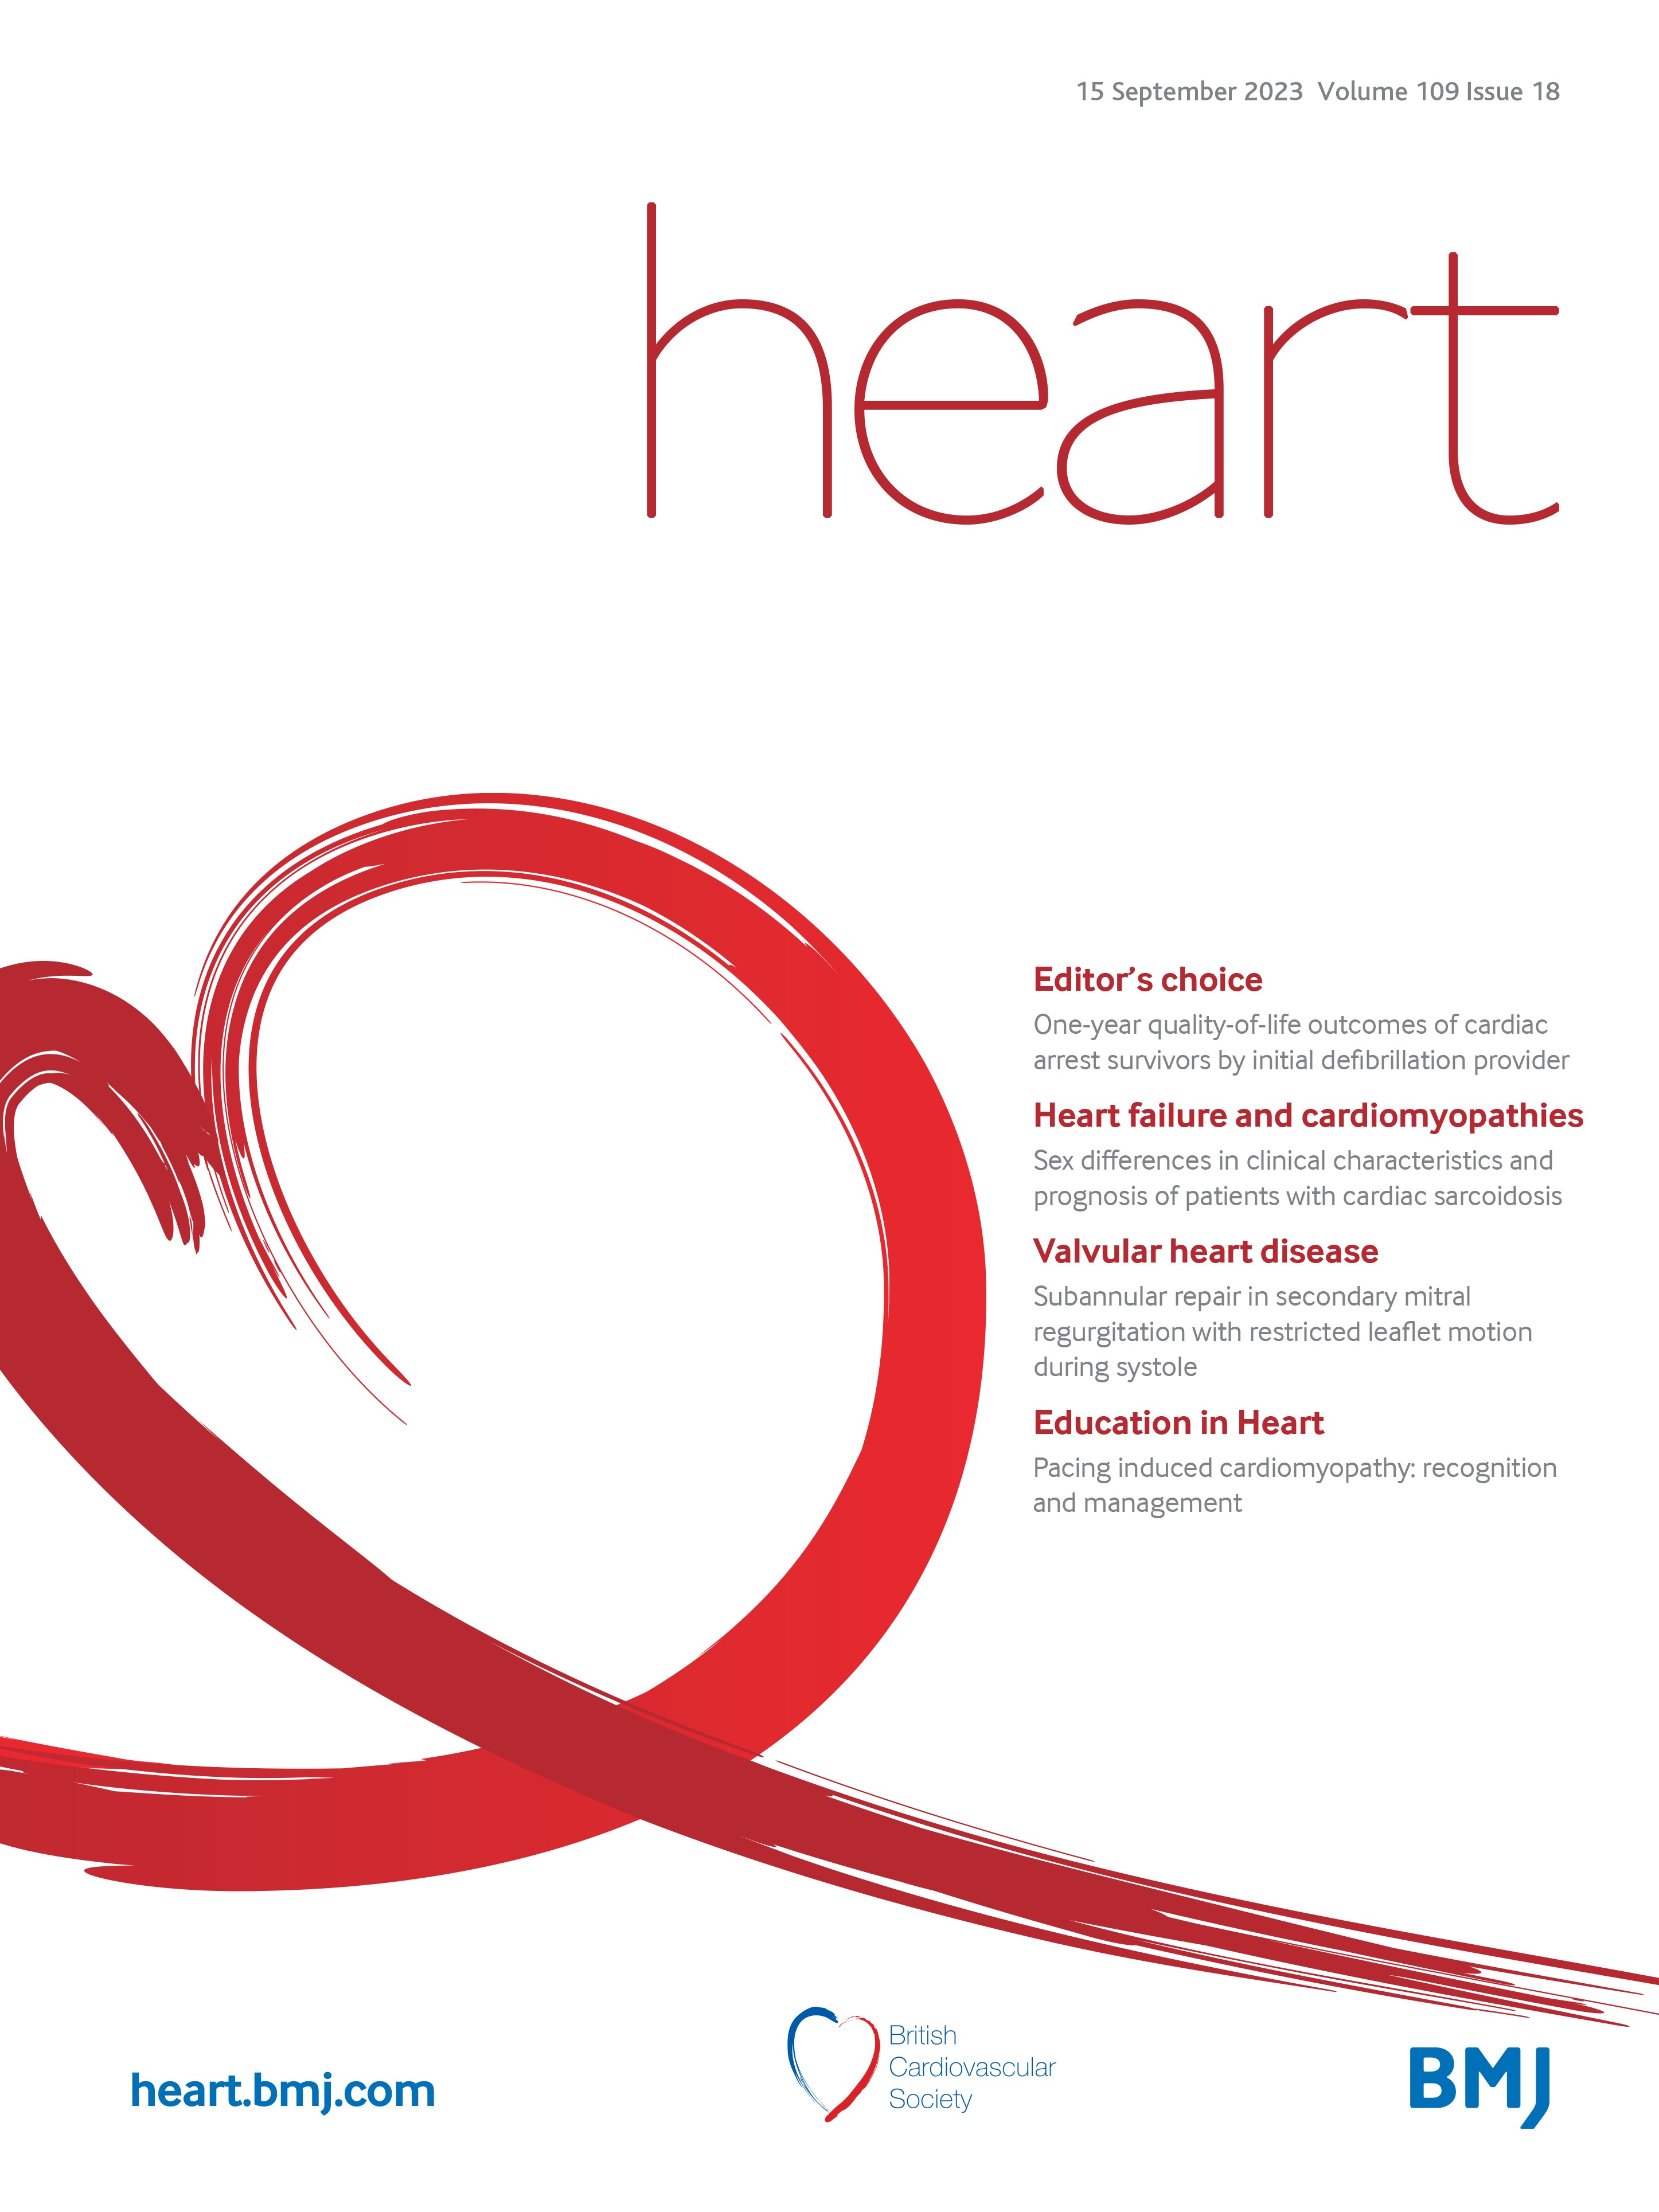 Pacing induced cardiomyopathy: recognition and management